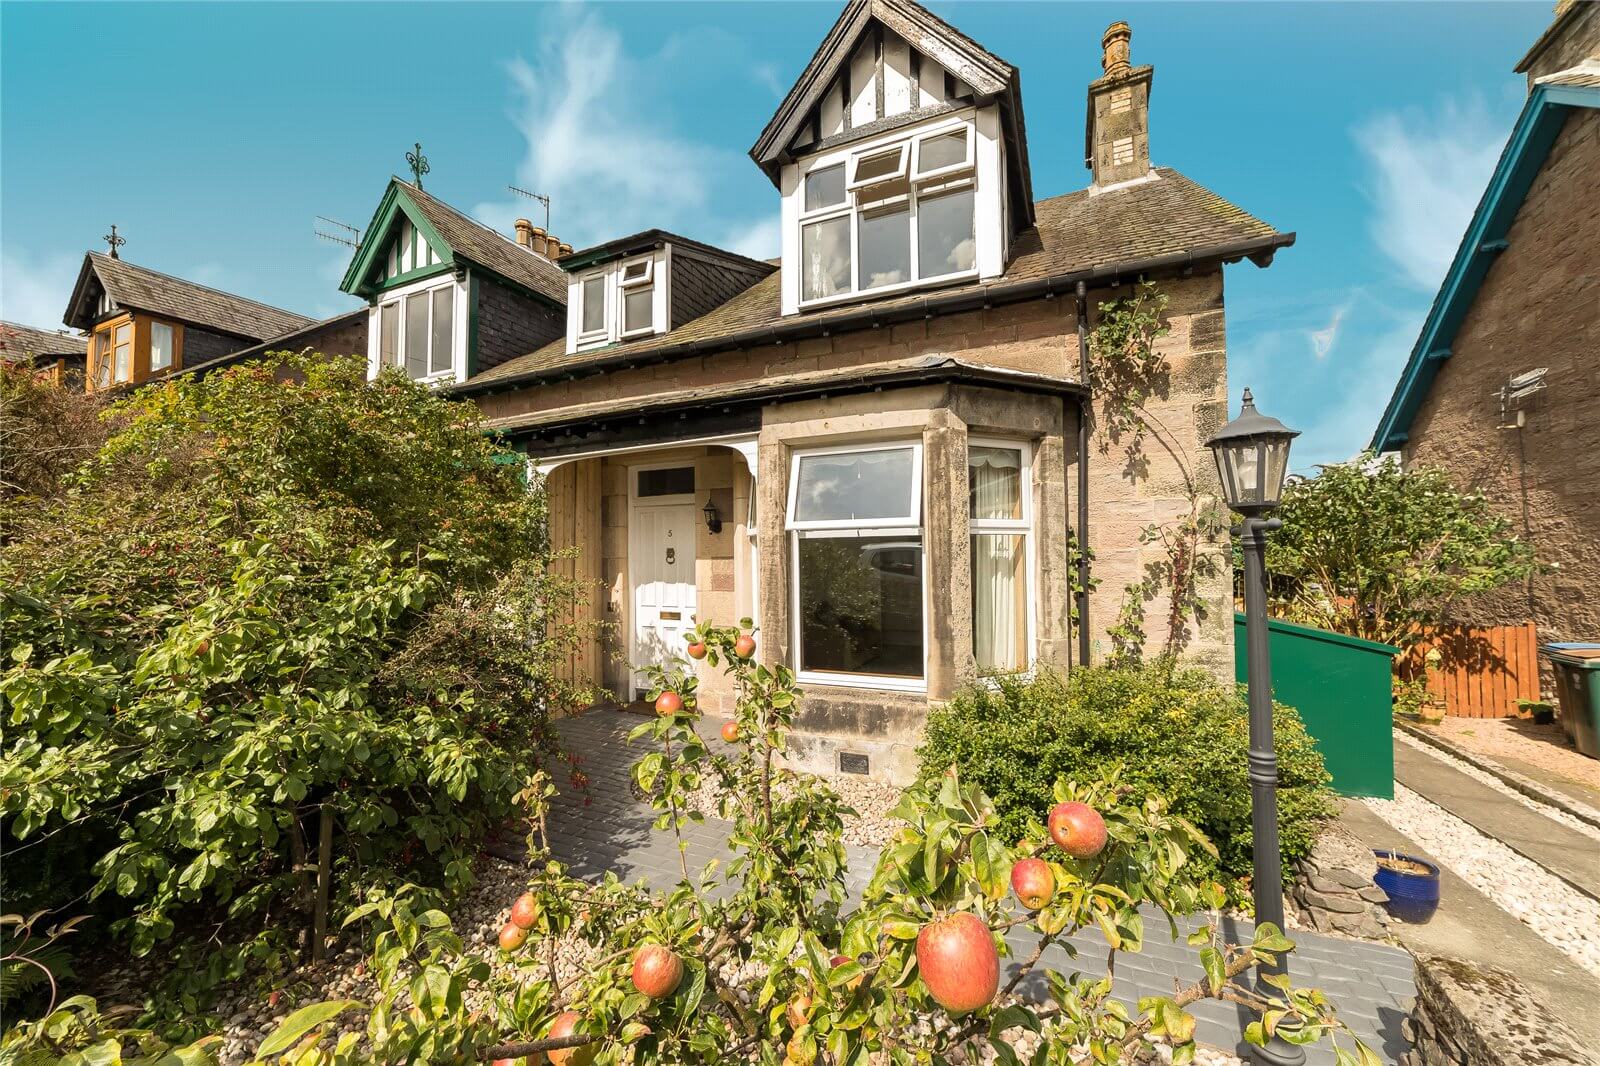 Our latest properties for sale and to let (2nd September 2019)